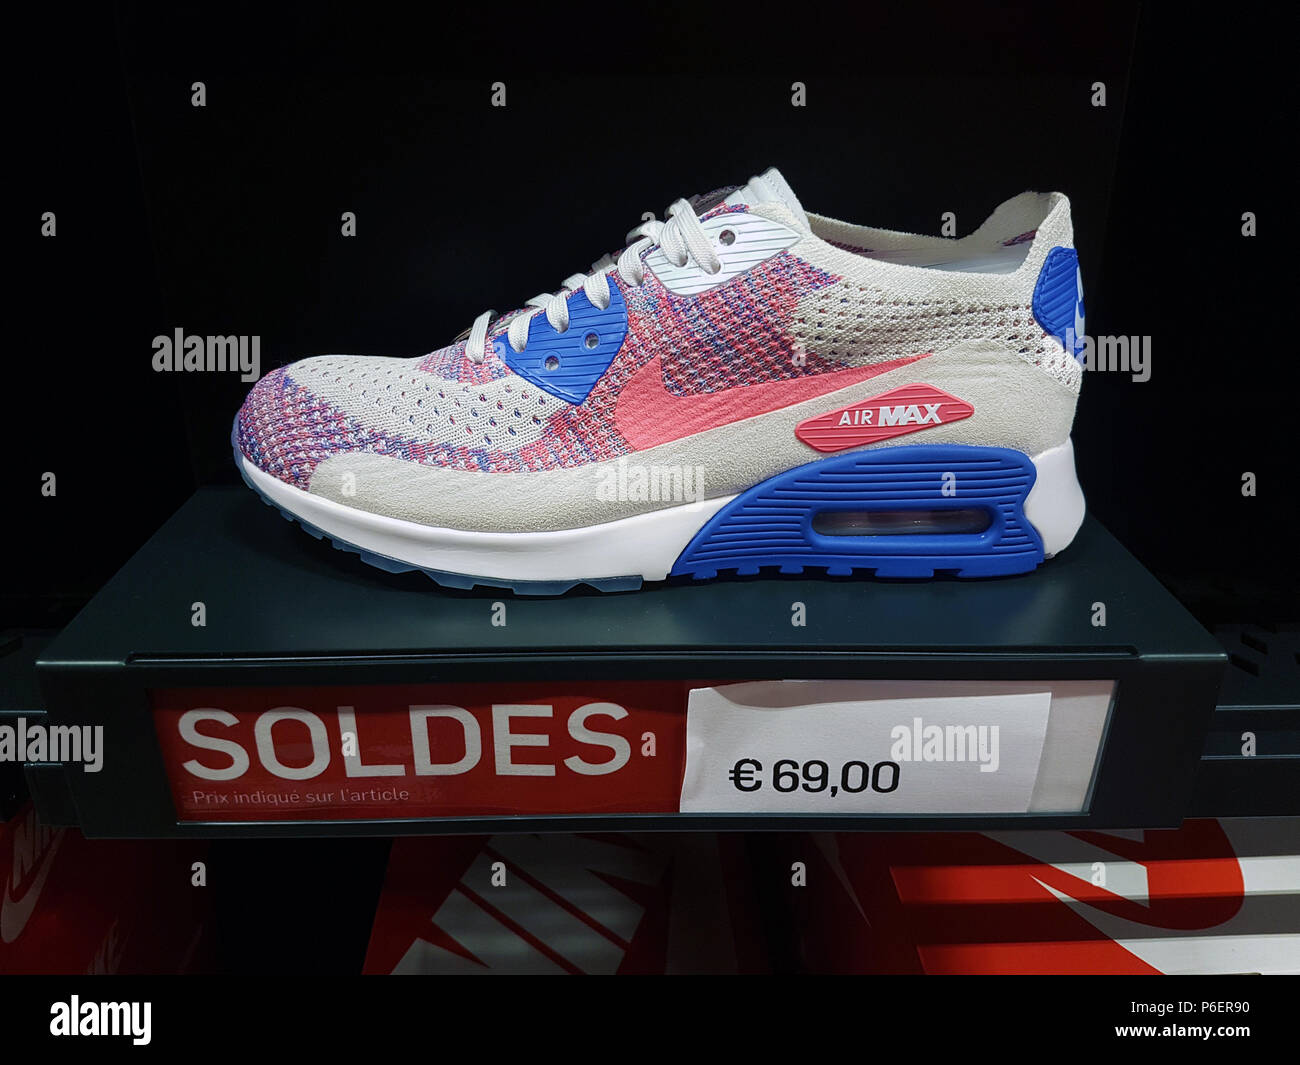 Villefontaine, France - July 29 2018: Nike Air Max Shoe On Display in Nike  Outlet Store at The Village Outlet Shopping, Sale Price Sign in French Lang  Stock Photo - Alamy